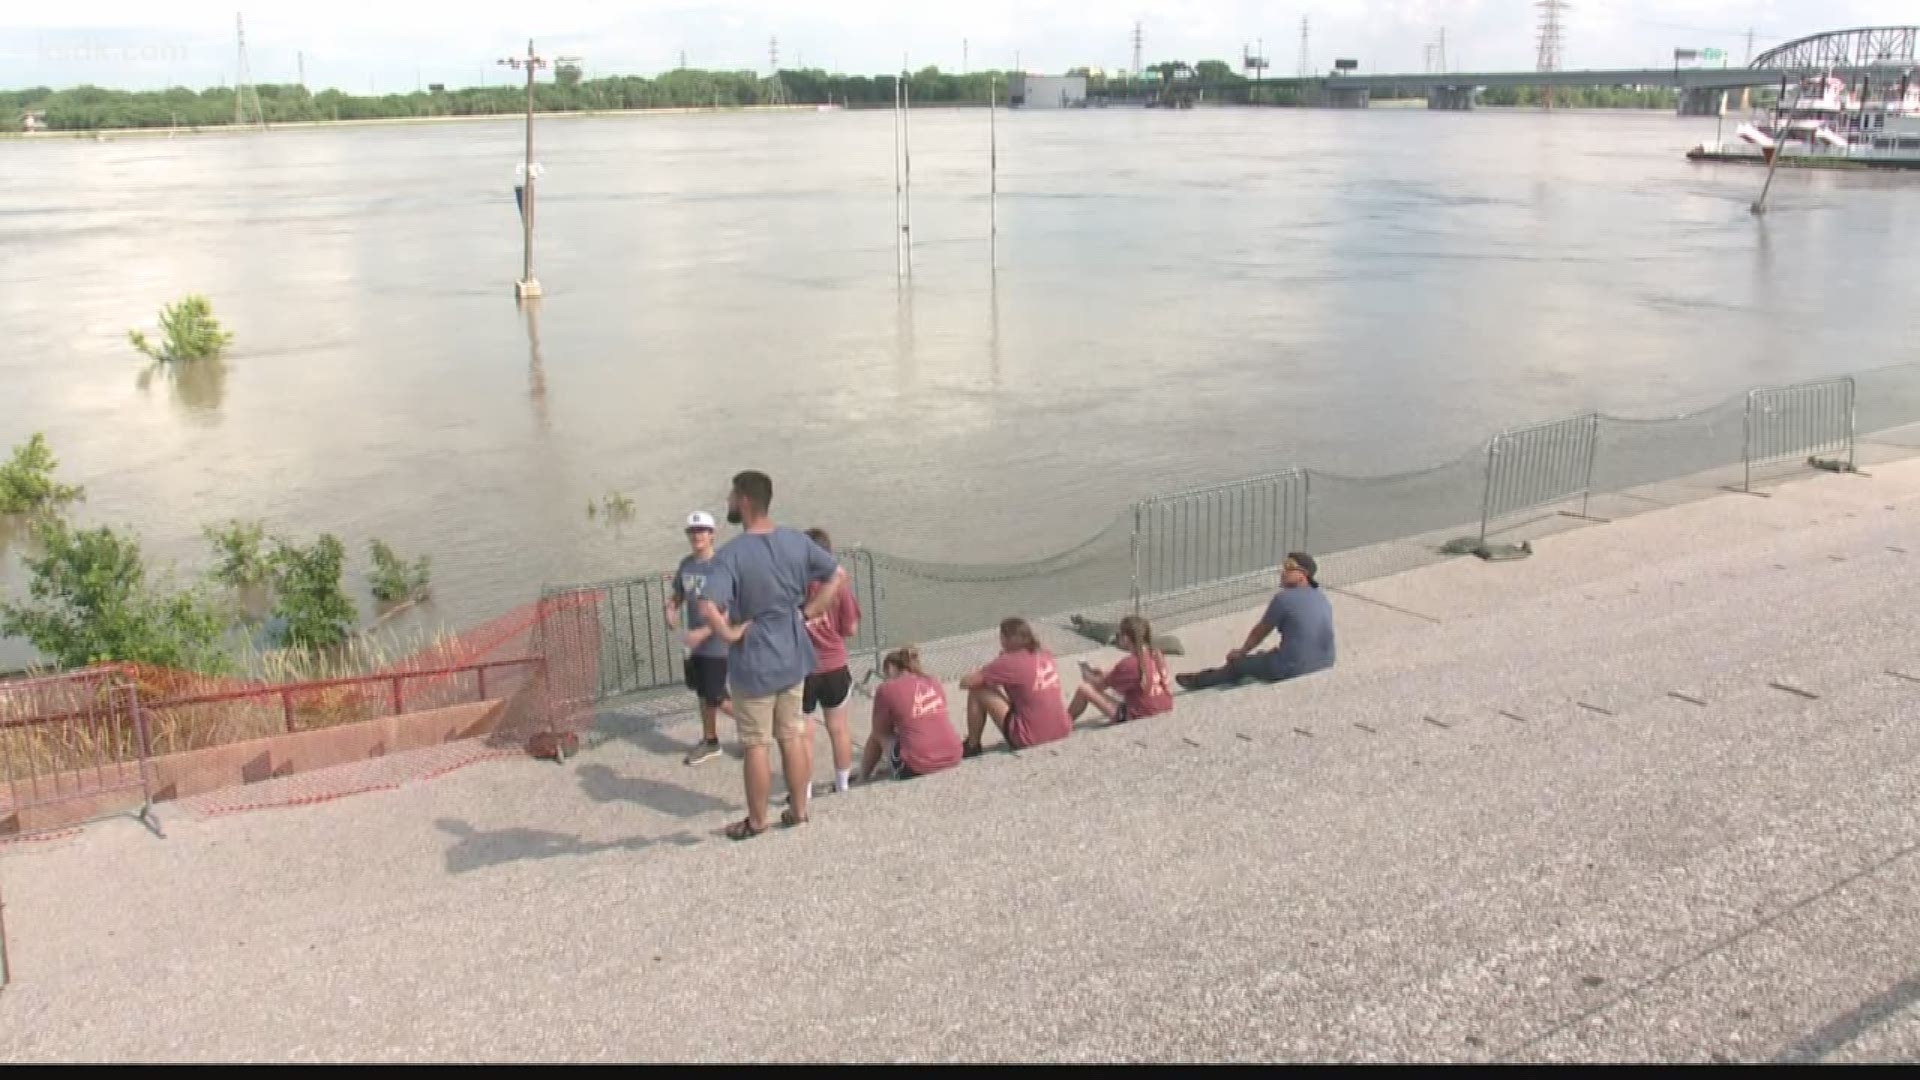 In downtown St. Louis, the Mississippi River crested last night. And the flood has become an attraction of its own.